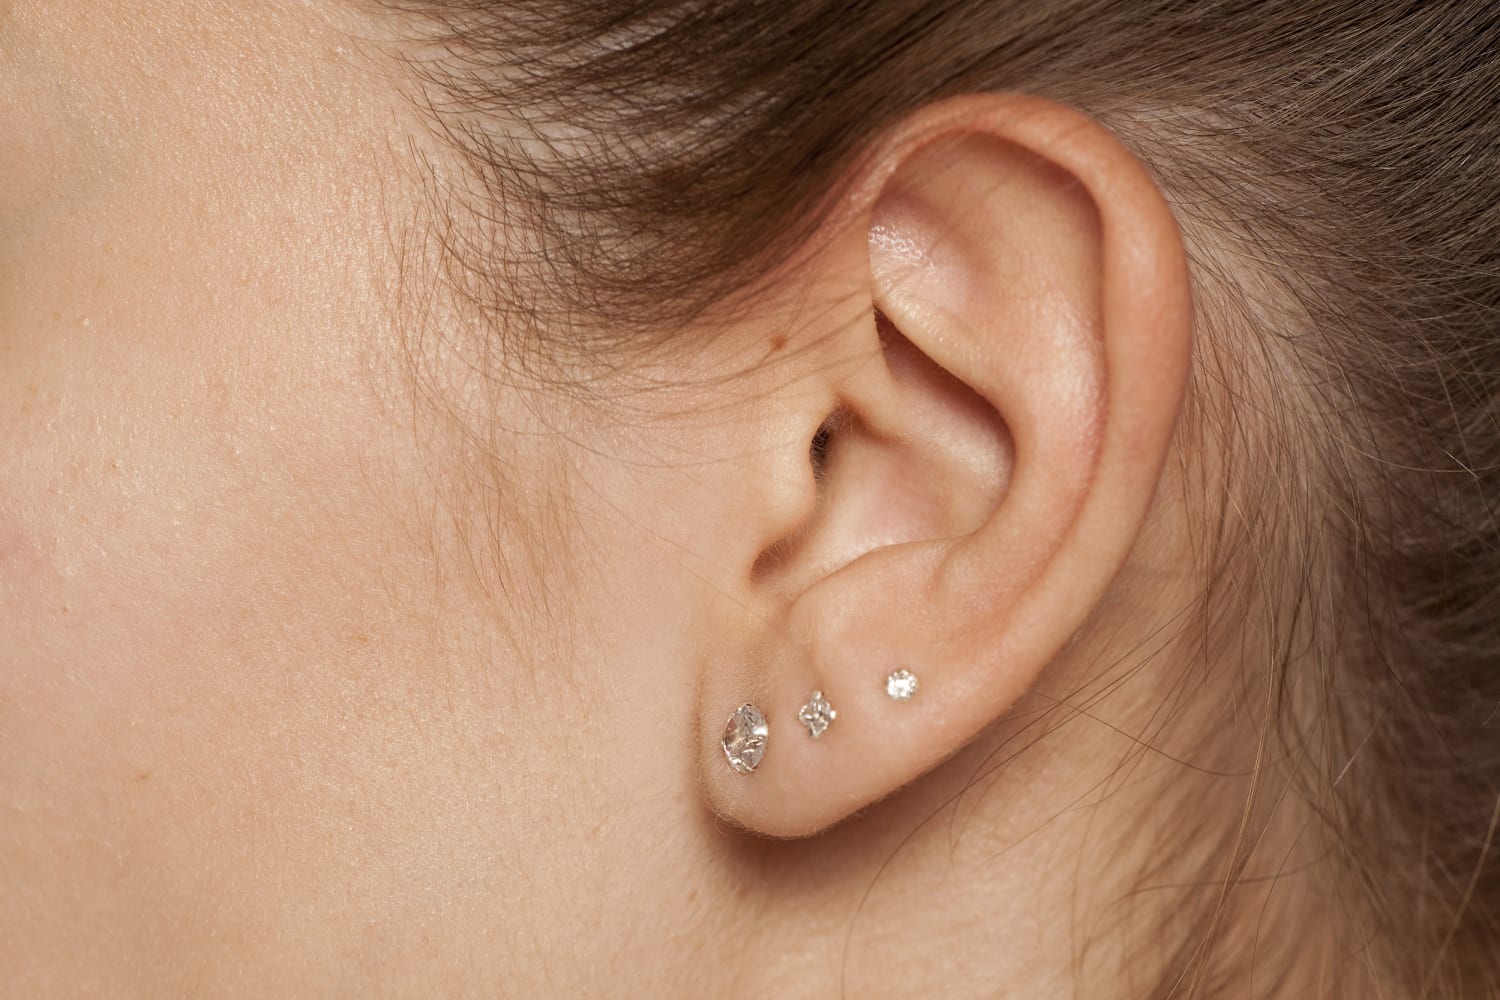 5 Ear Stacks Perfect For Any Piercing Style  Mejuri